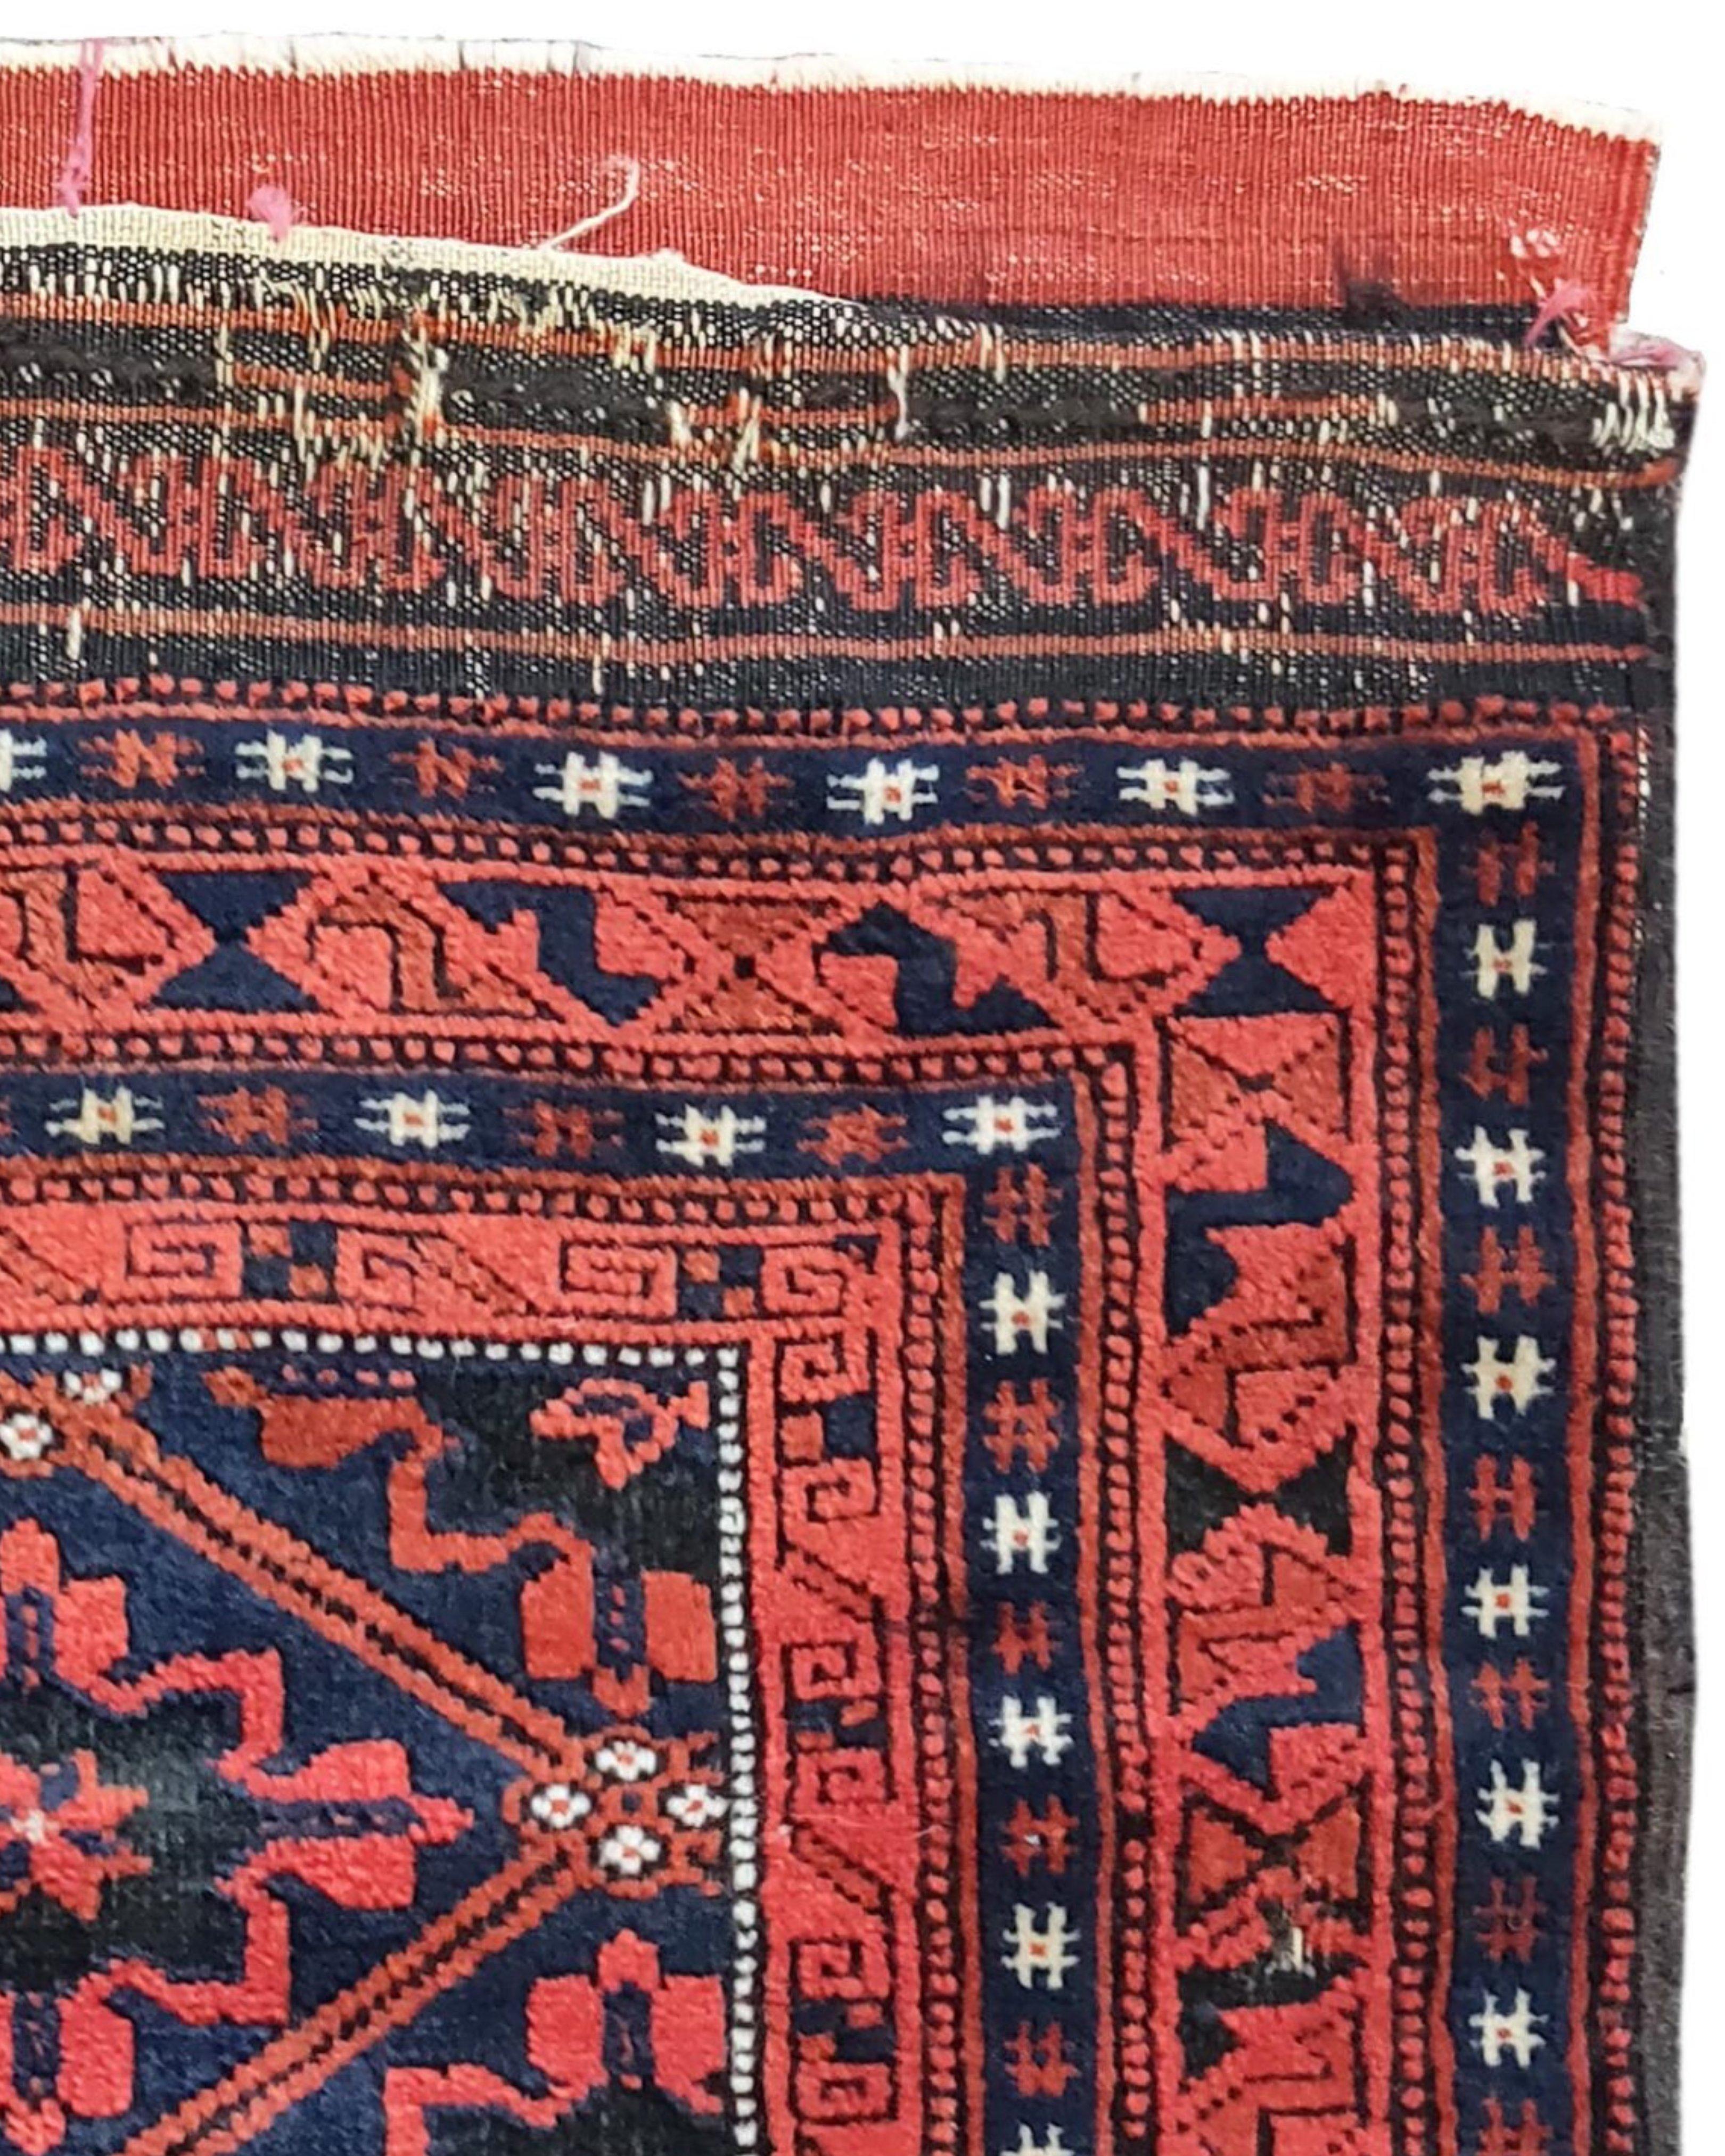 Baluch Bag, 19th Century

Additional Information:
Dimensions: 1'11